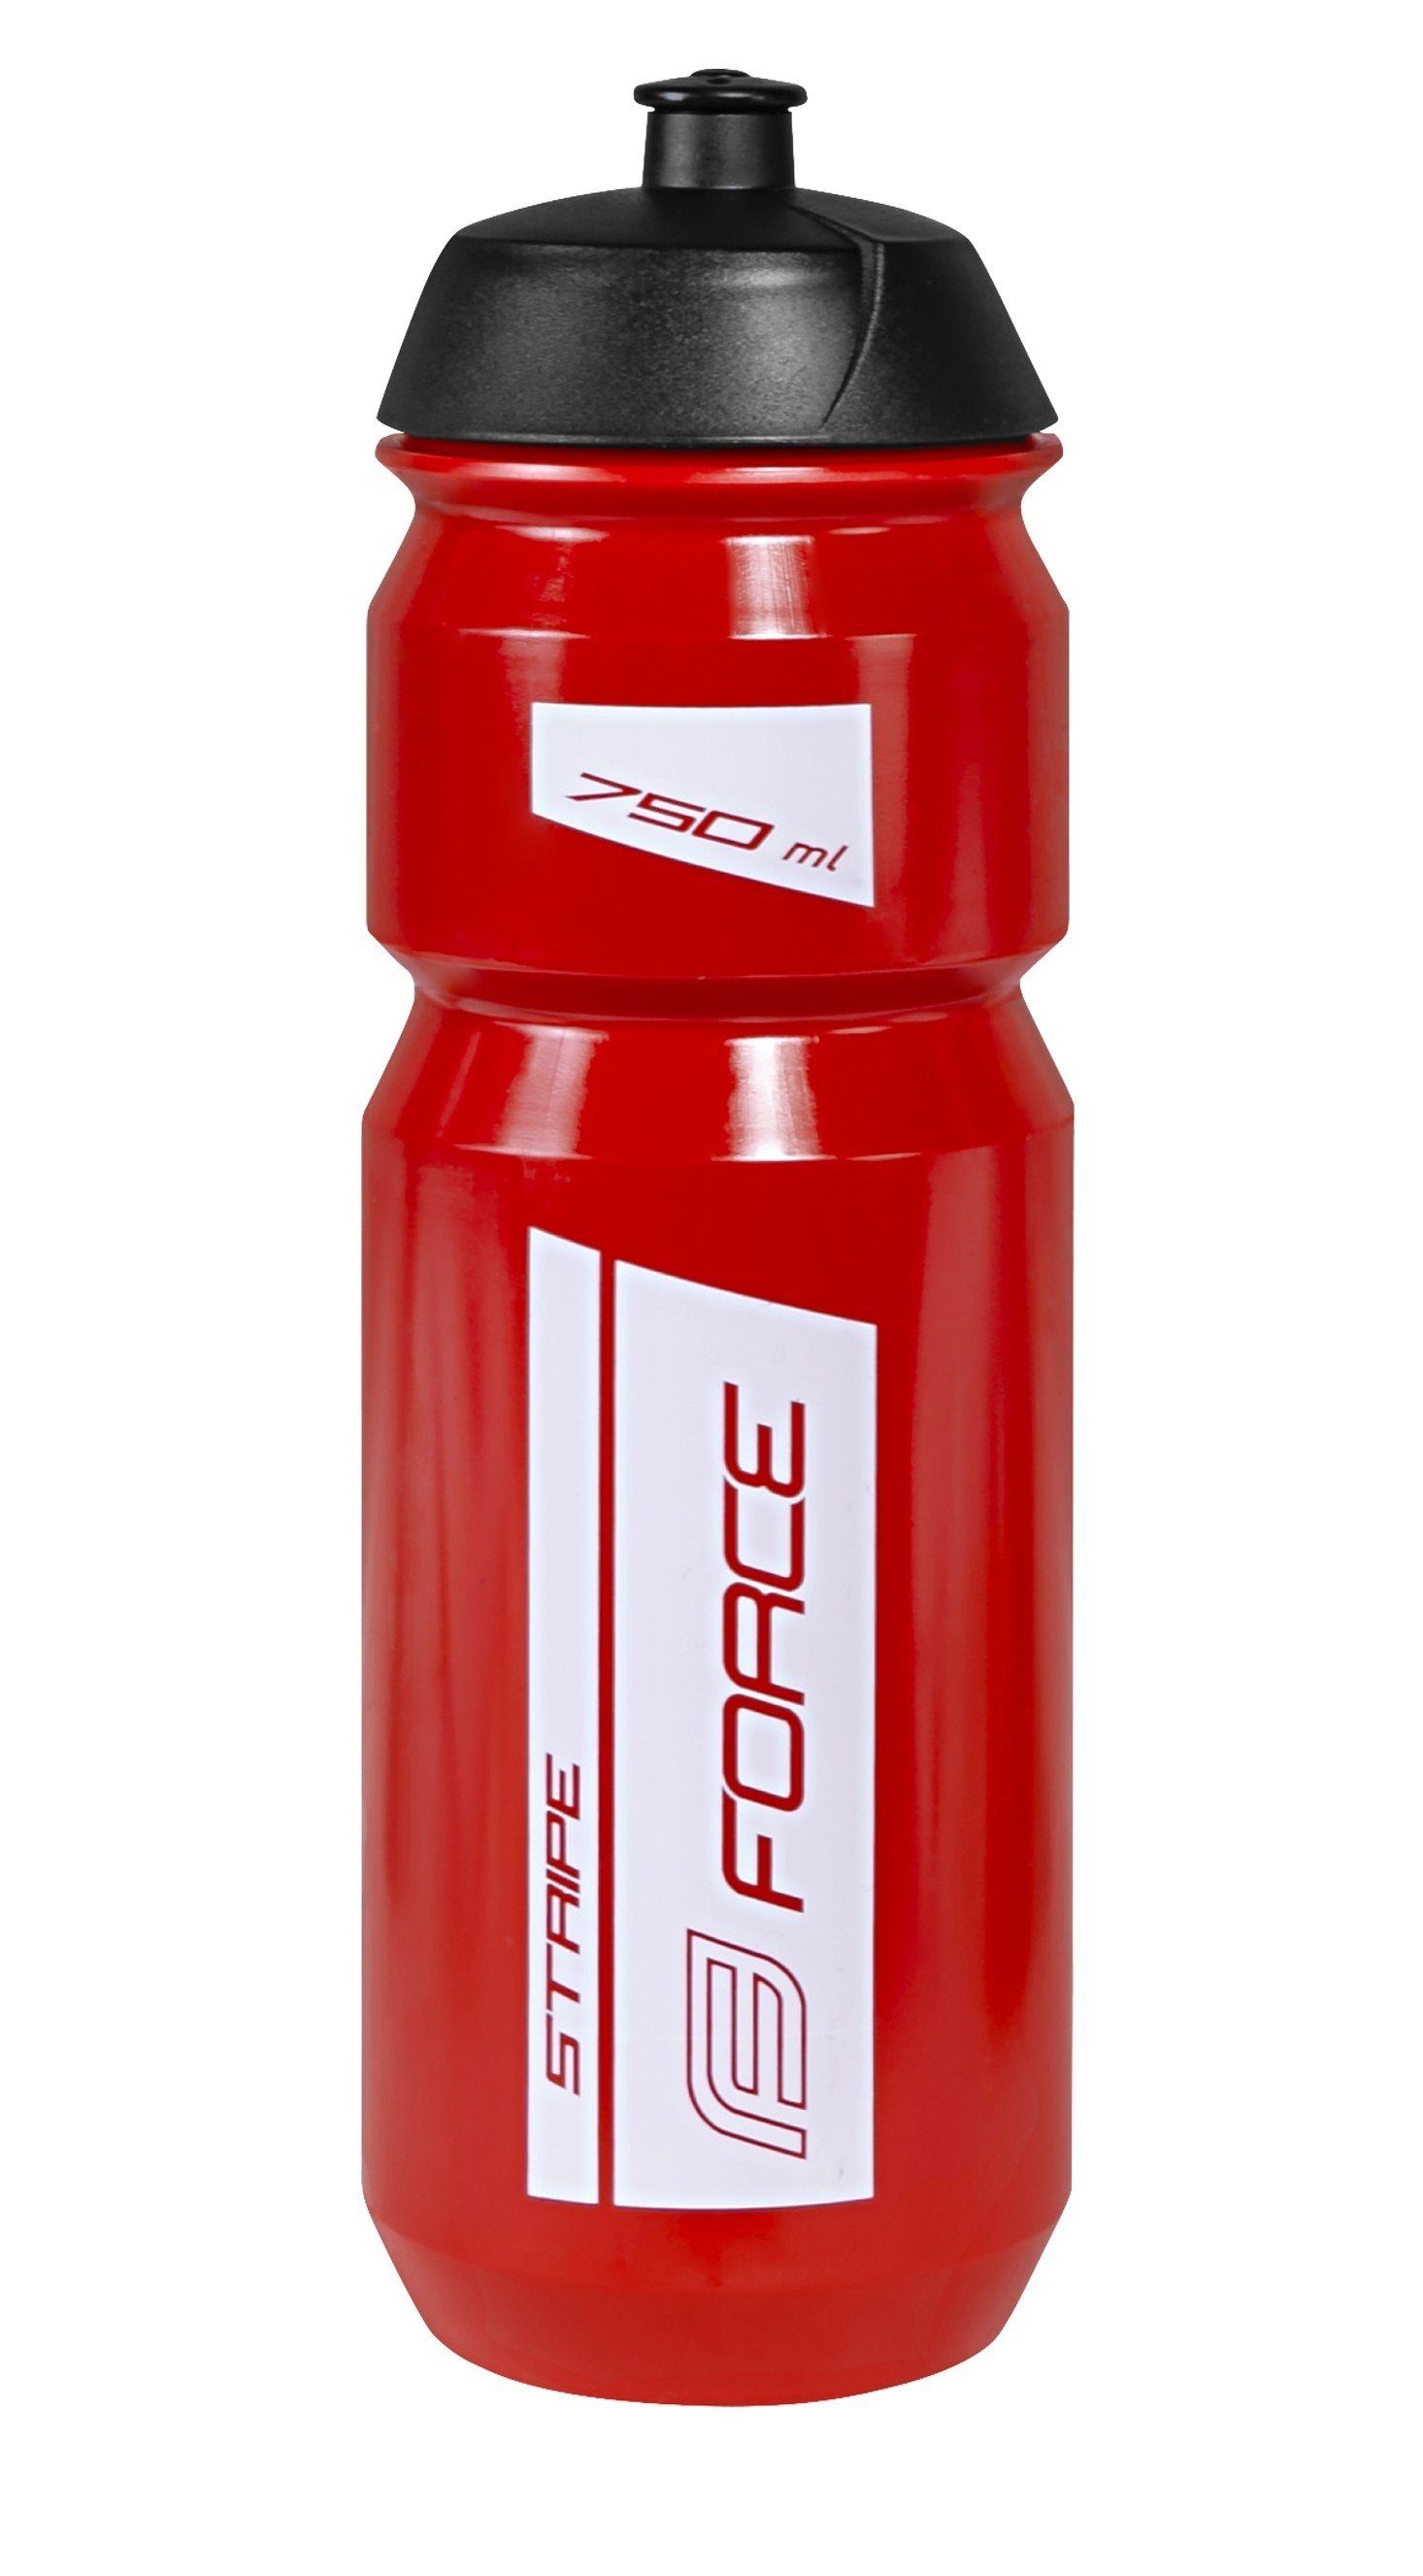 FORCE 0,75 rot l STRIPE Trinkflasche FORCE Flasche